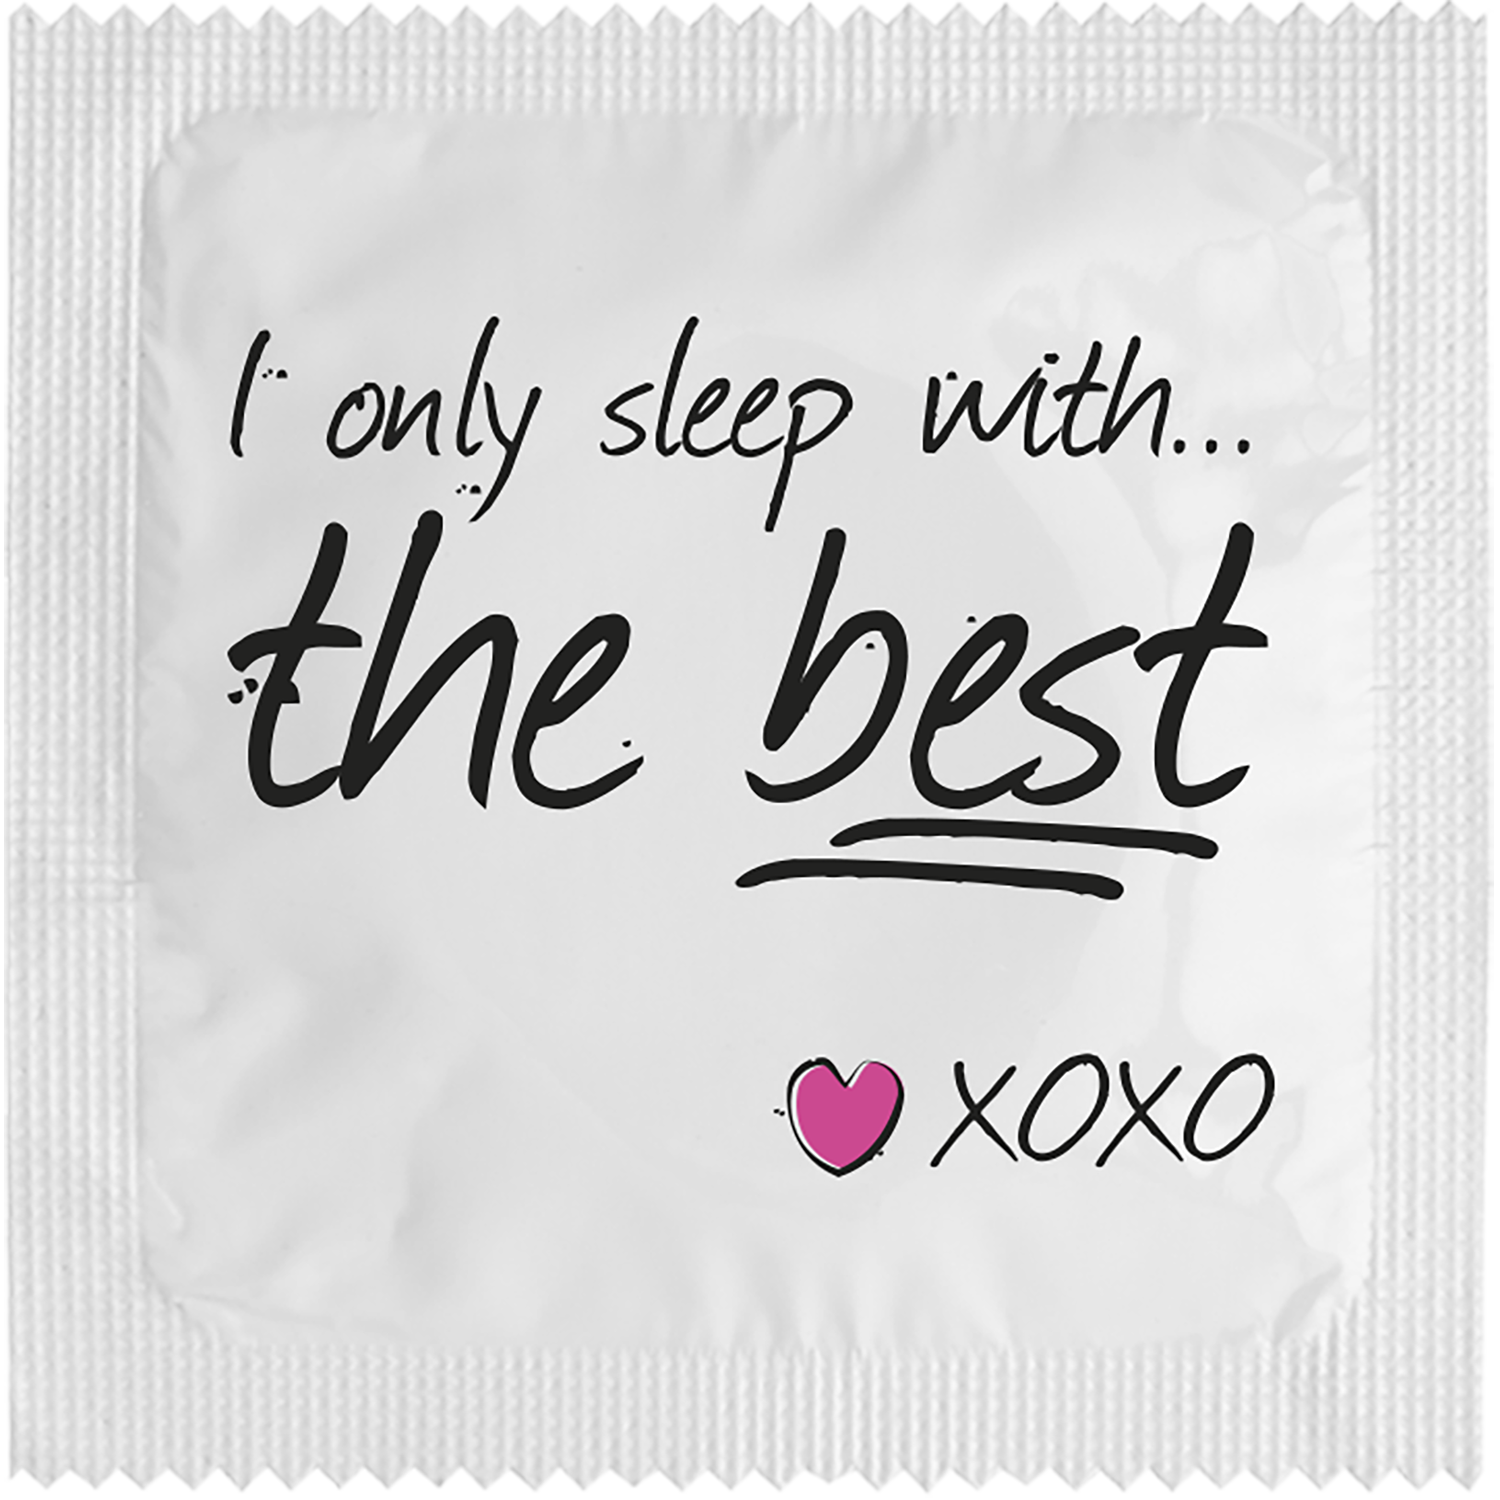 Image of funny condom "I Only Sleep With The Best"